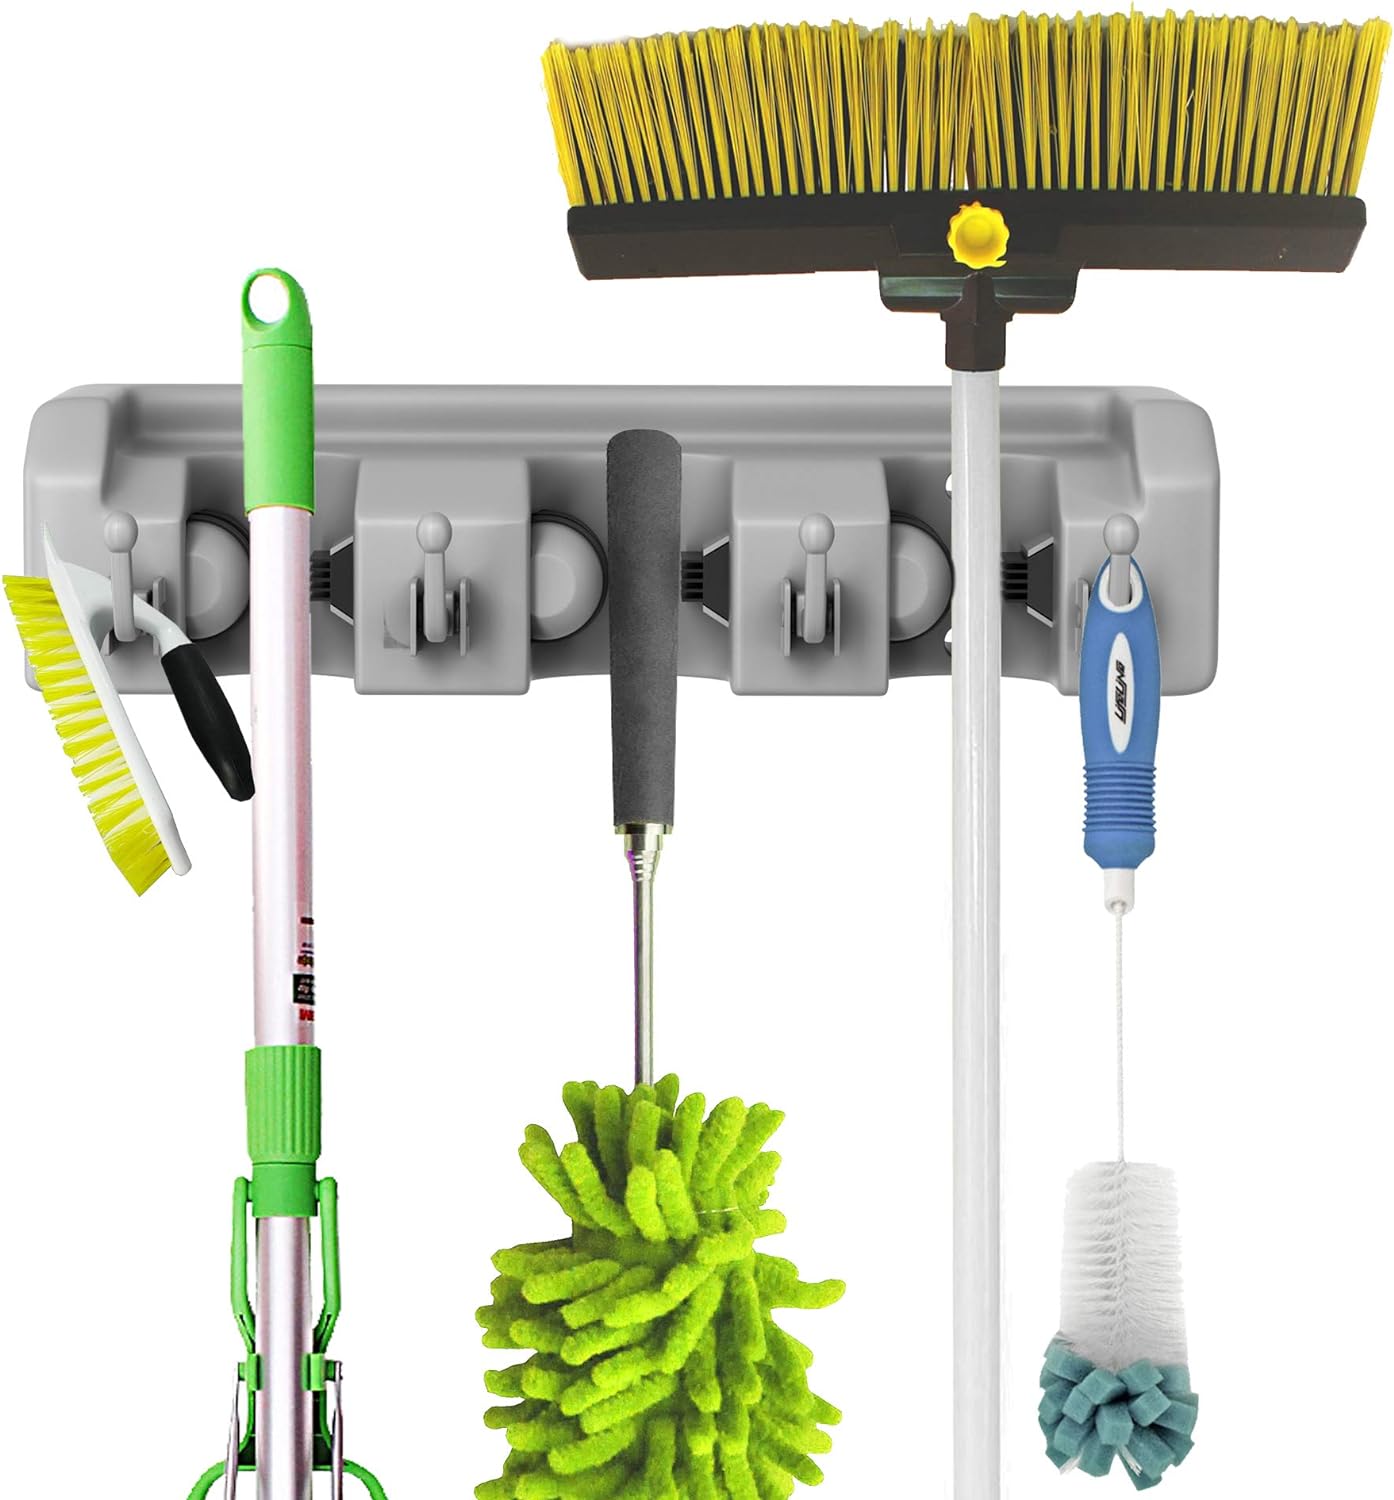 Stalwart Broom and Mop Holder for Organizing Kitchens, Closets, Garages, or Garden by Lavish Home&#226;&#128;&#147; Multi-Fu